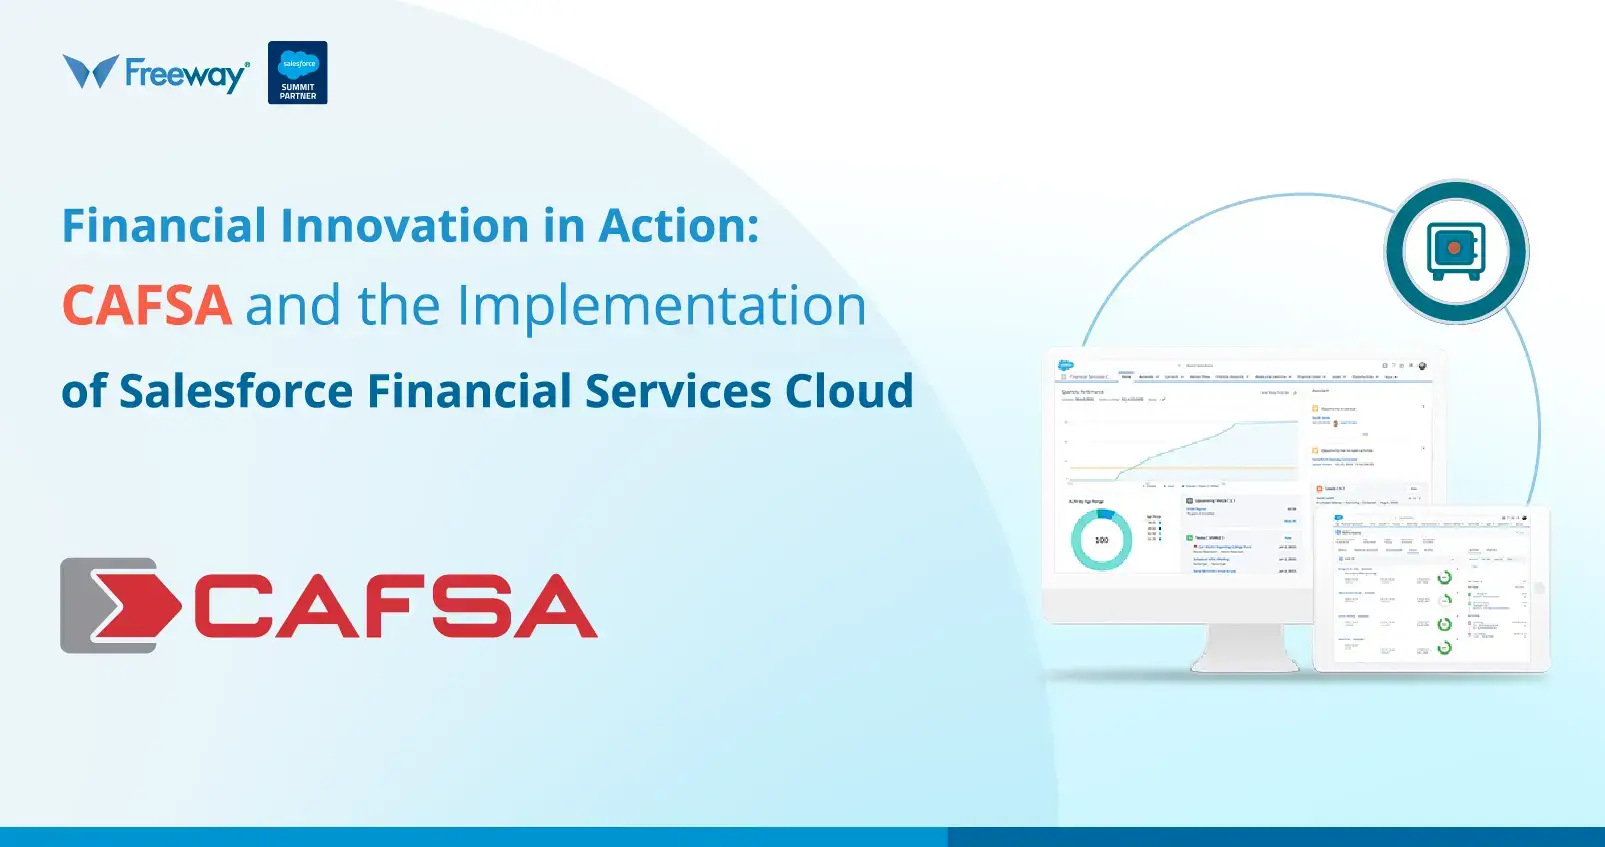 Financial Innovation in Action: CAFSA and the Implementation of Salesforce Financial Services Cloud